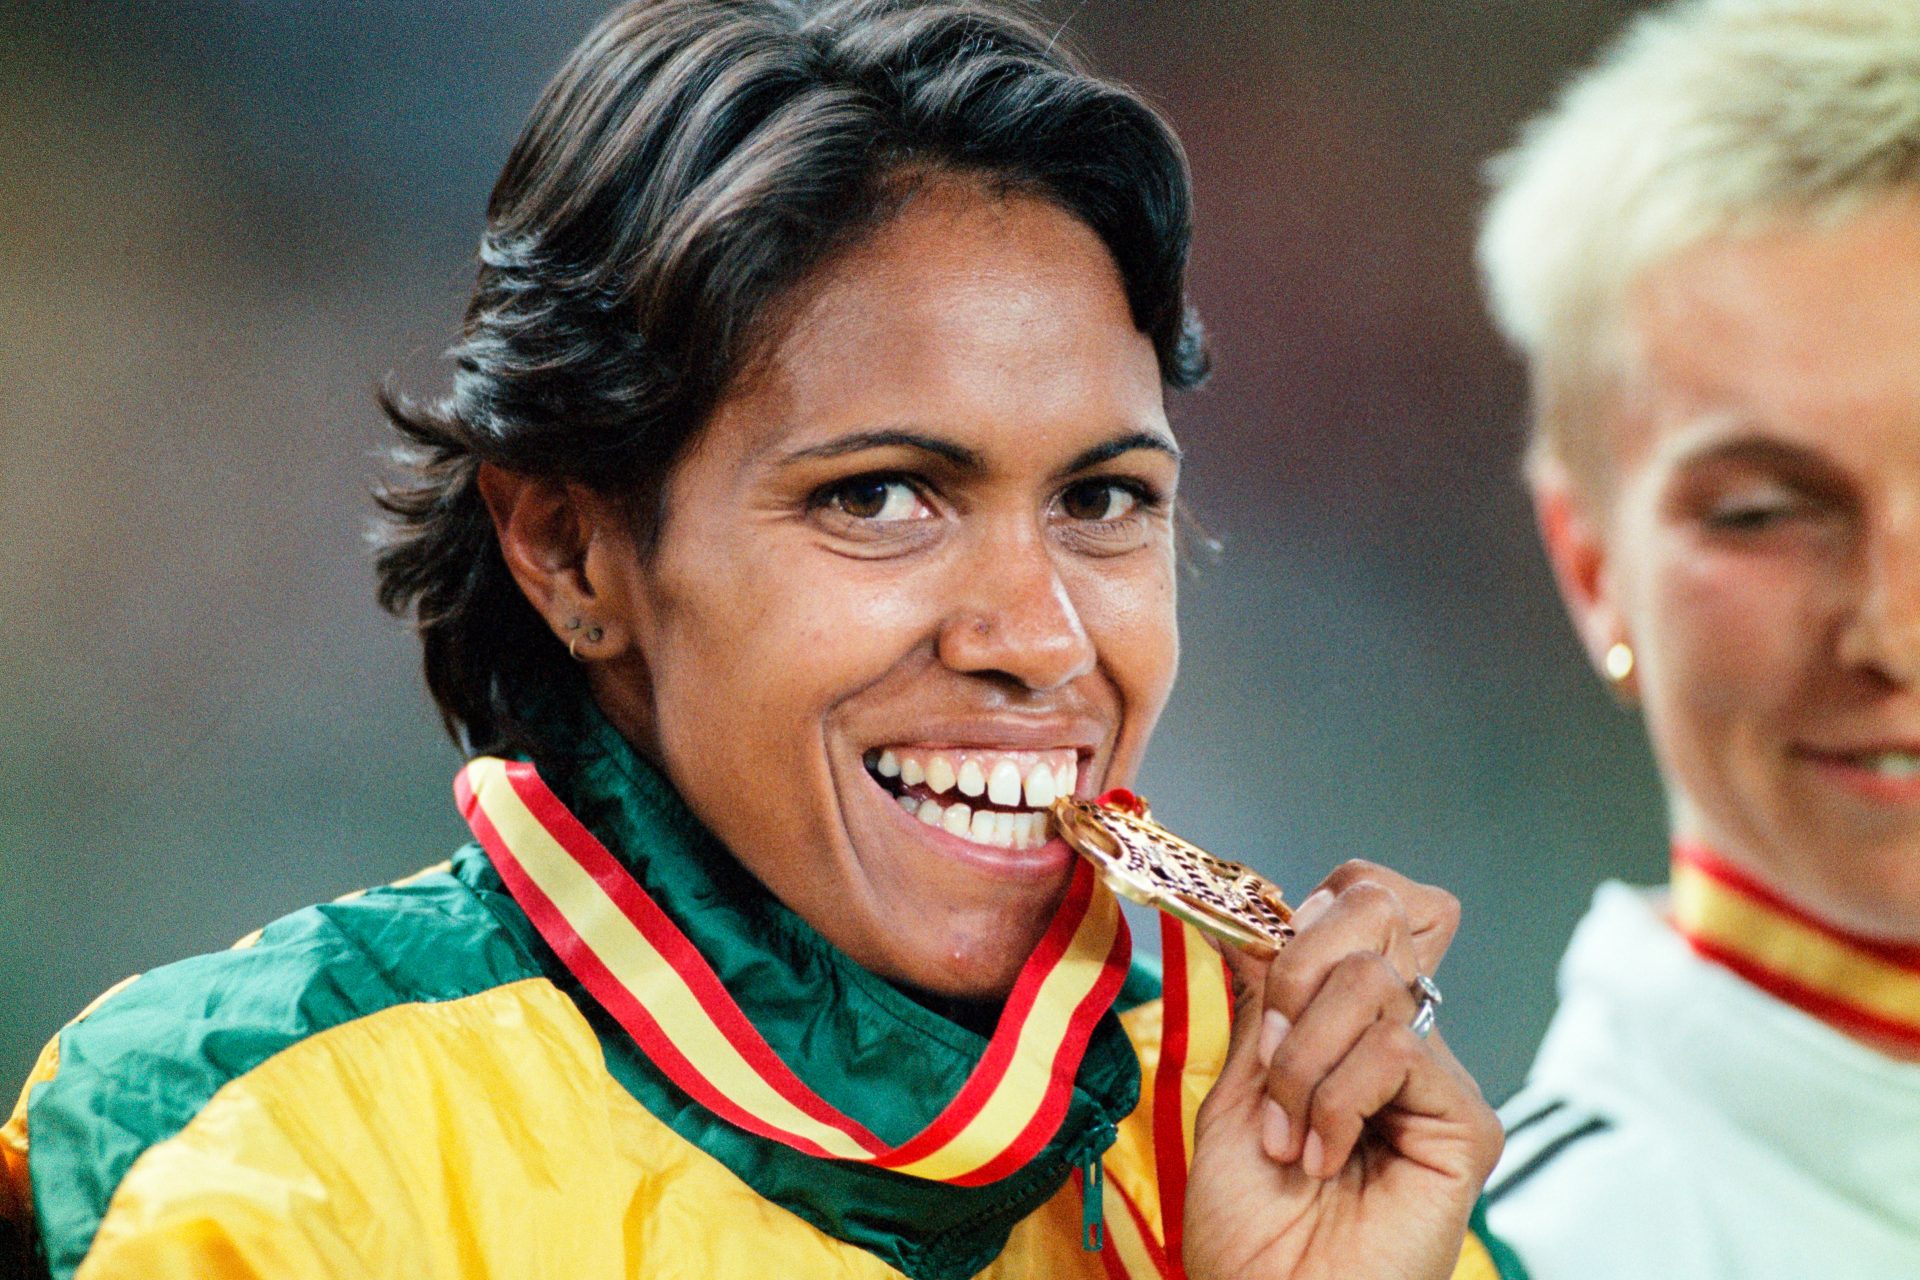 Olympic legend Cathy Freeman reveals her biggest regret following shocking DNA results